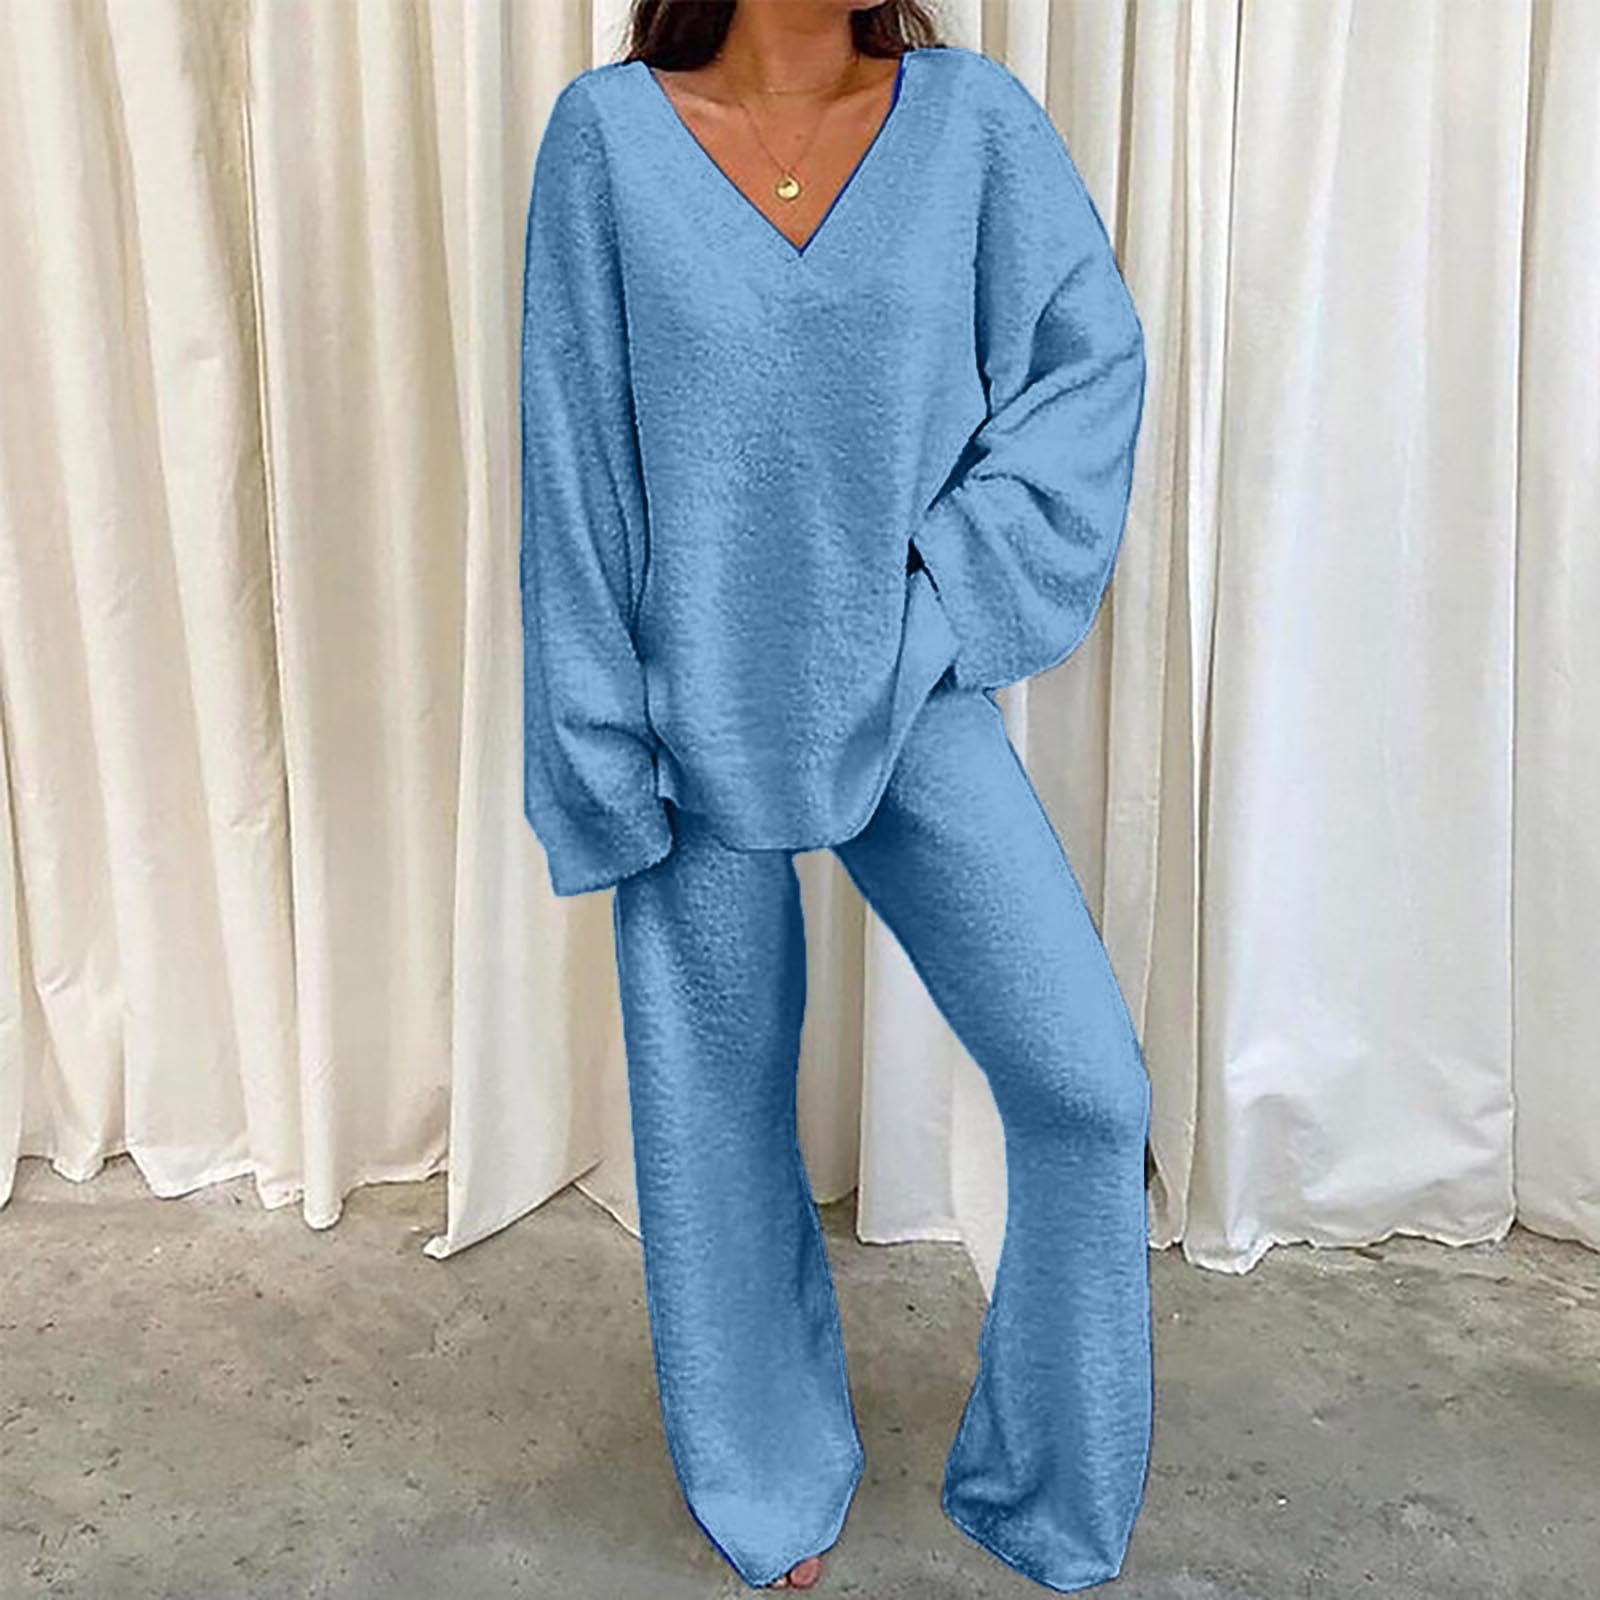 Lounge Sets Clearance under $20 Women Two Piece Outfits Long Sleeve Solid  Color Tops With High Waist Pants Baggy Warm Pajama Sets Blue L 